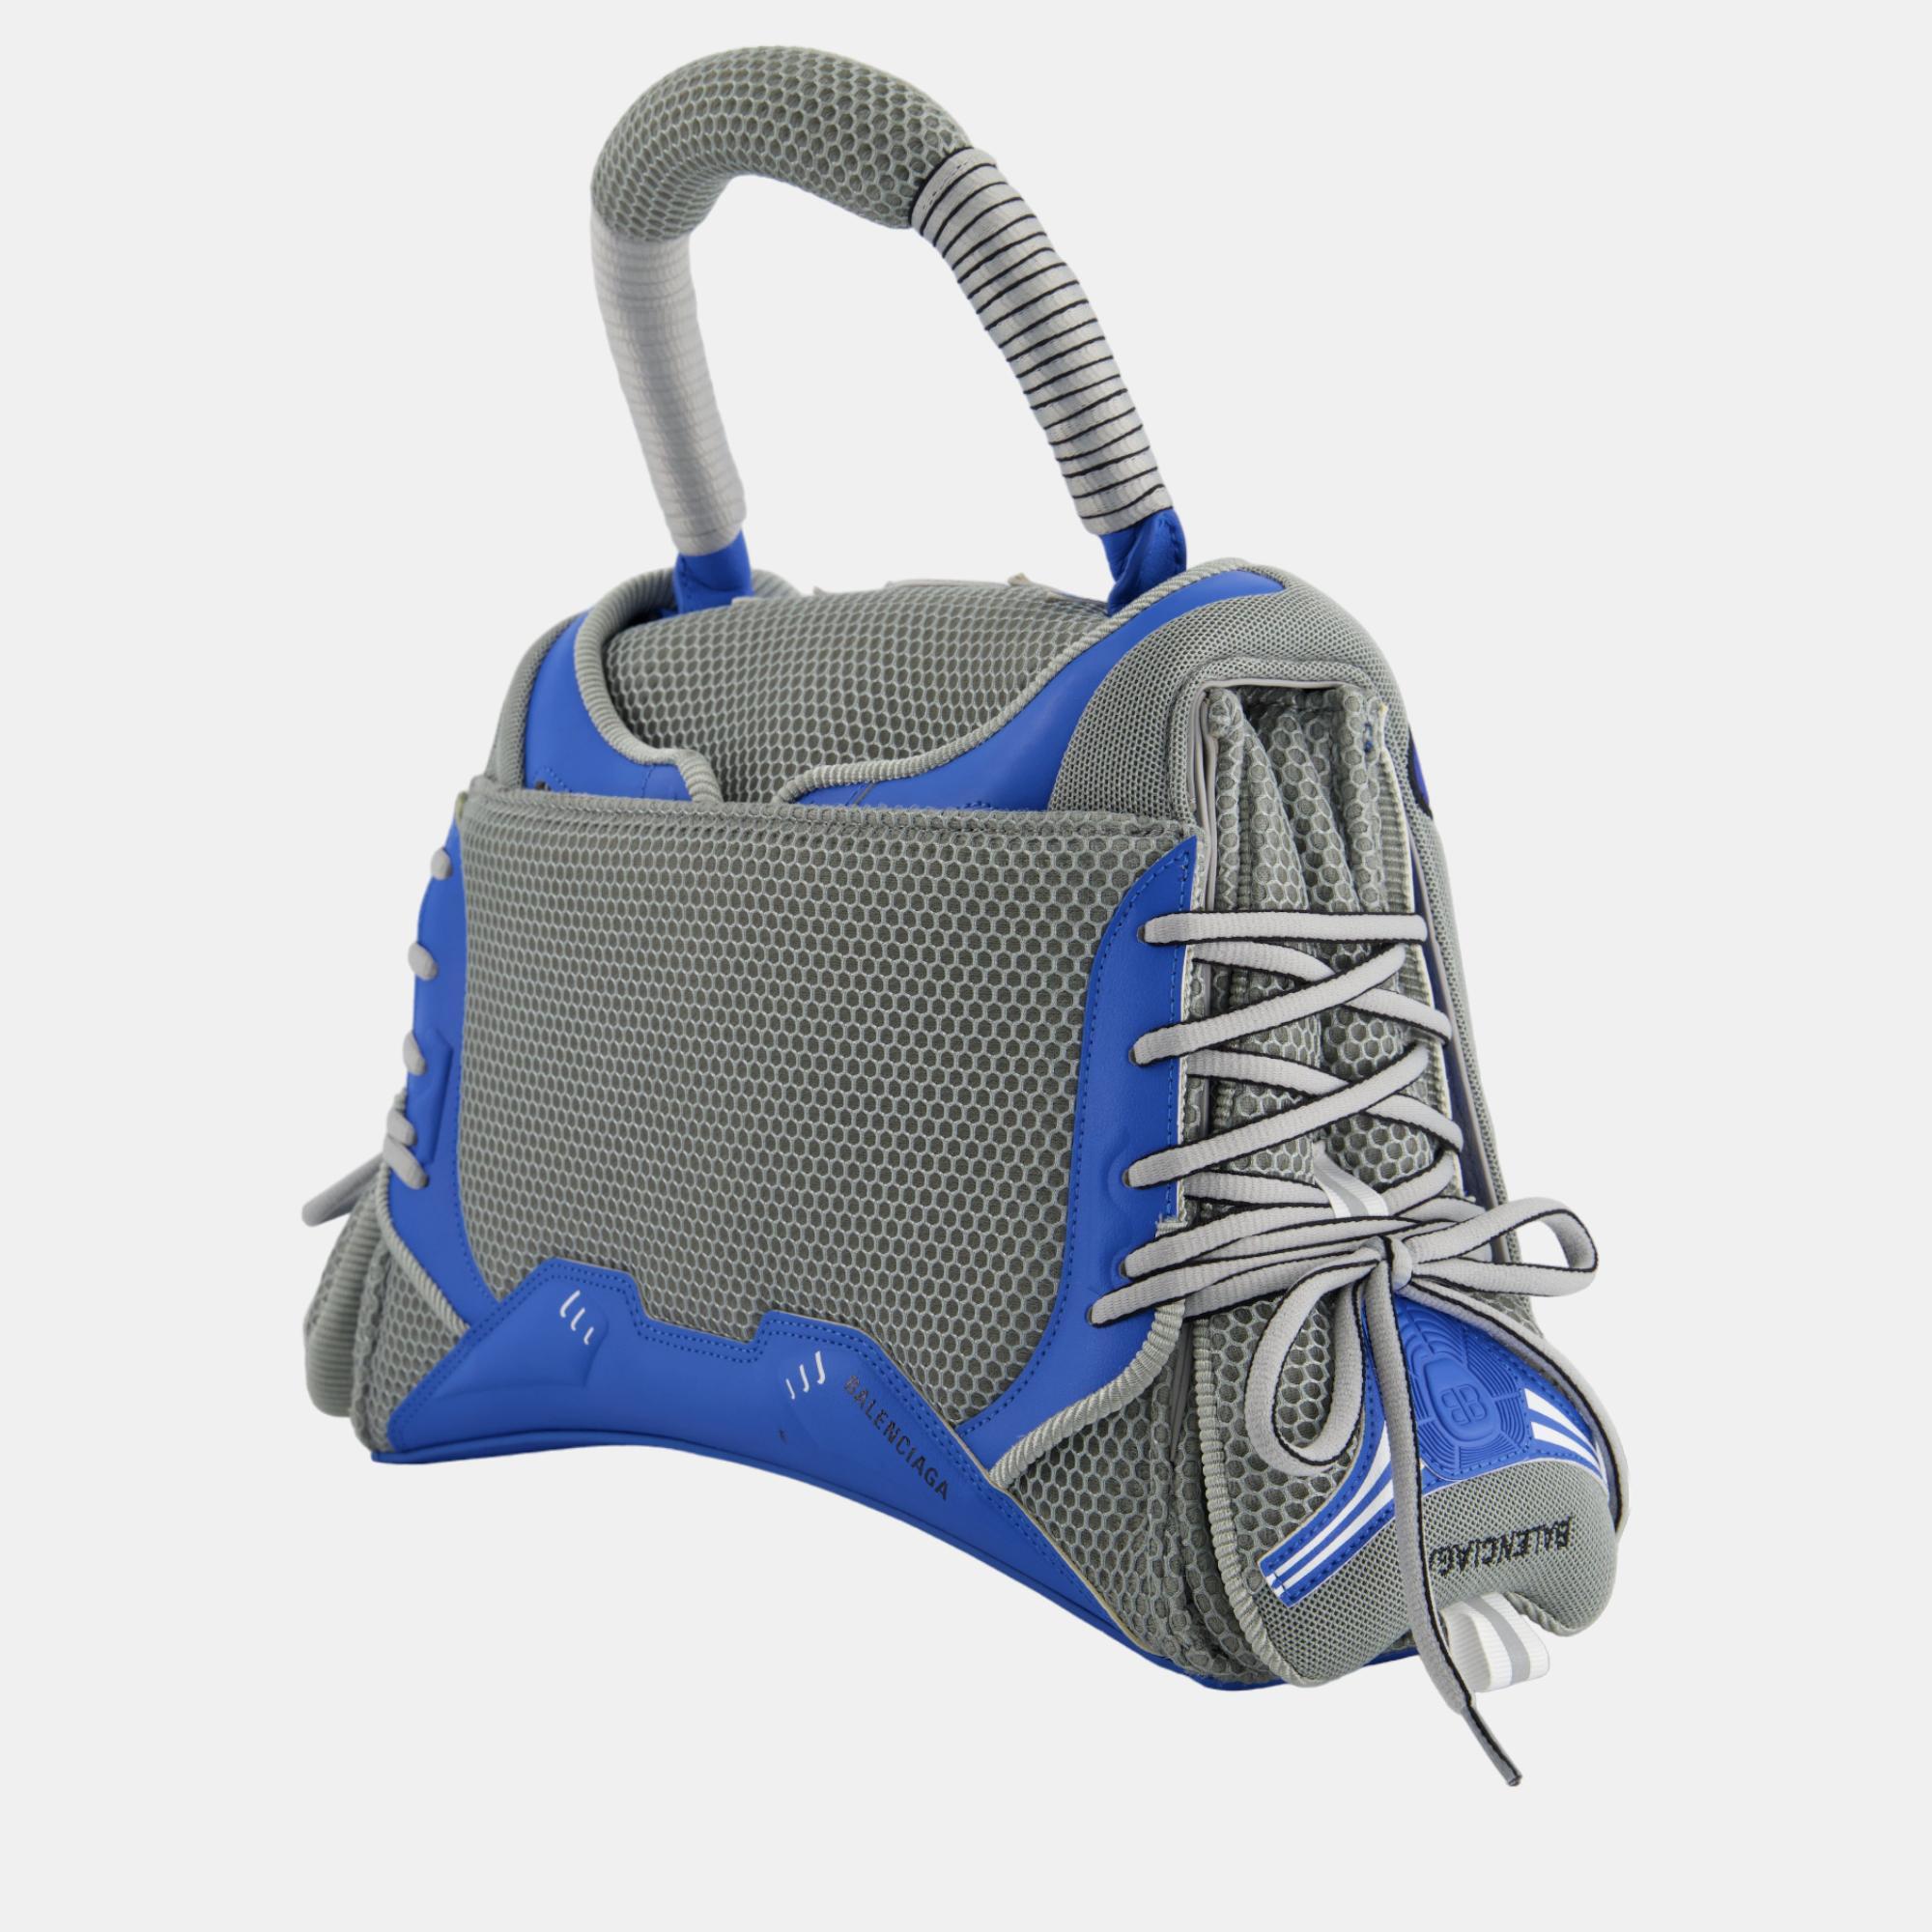 Balenciaga Blue And Grey Sneaker Head Hourglass Bag With Blue Hardware